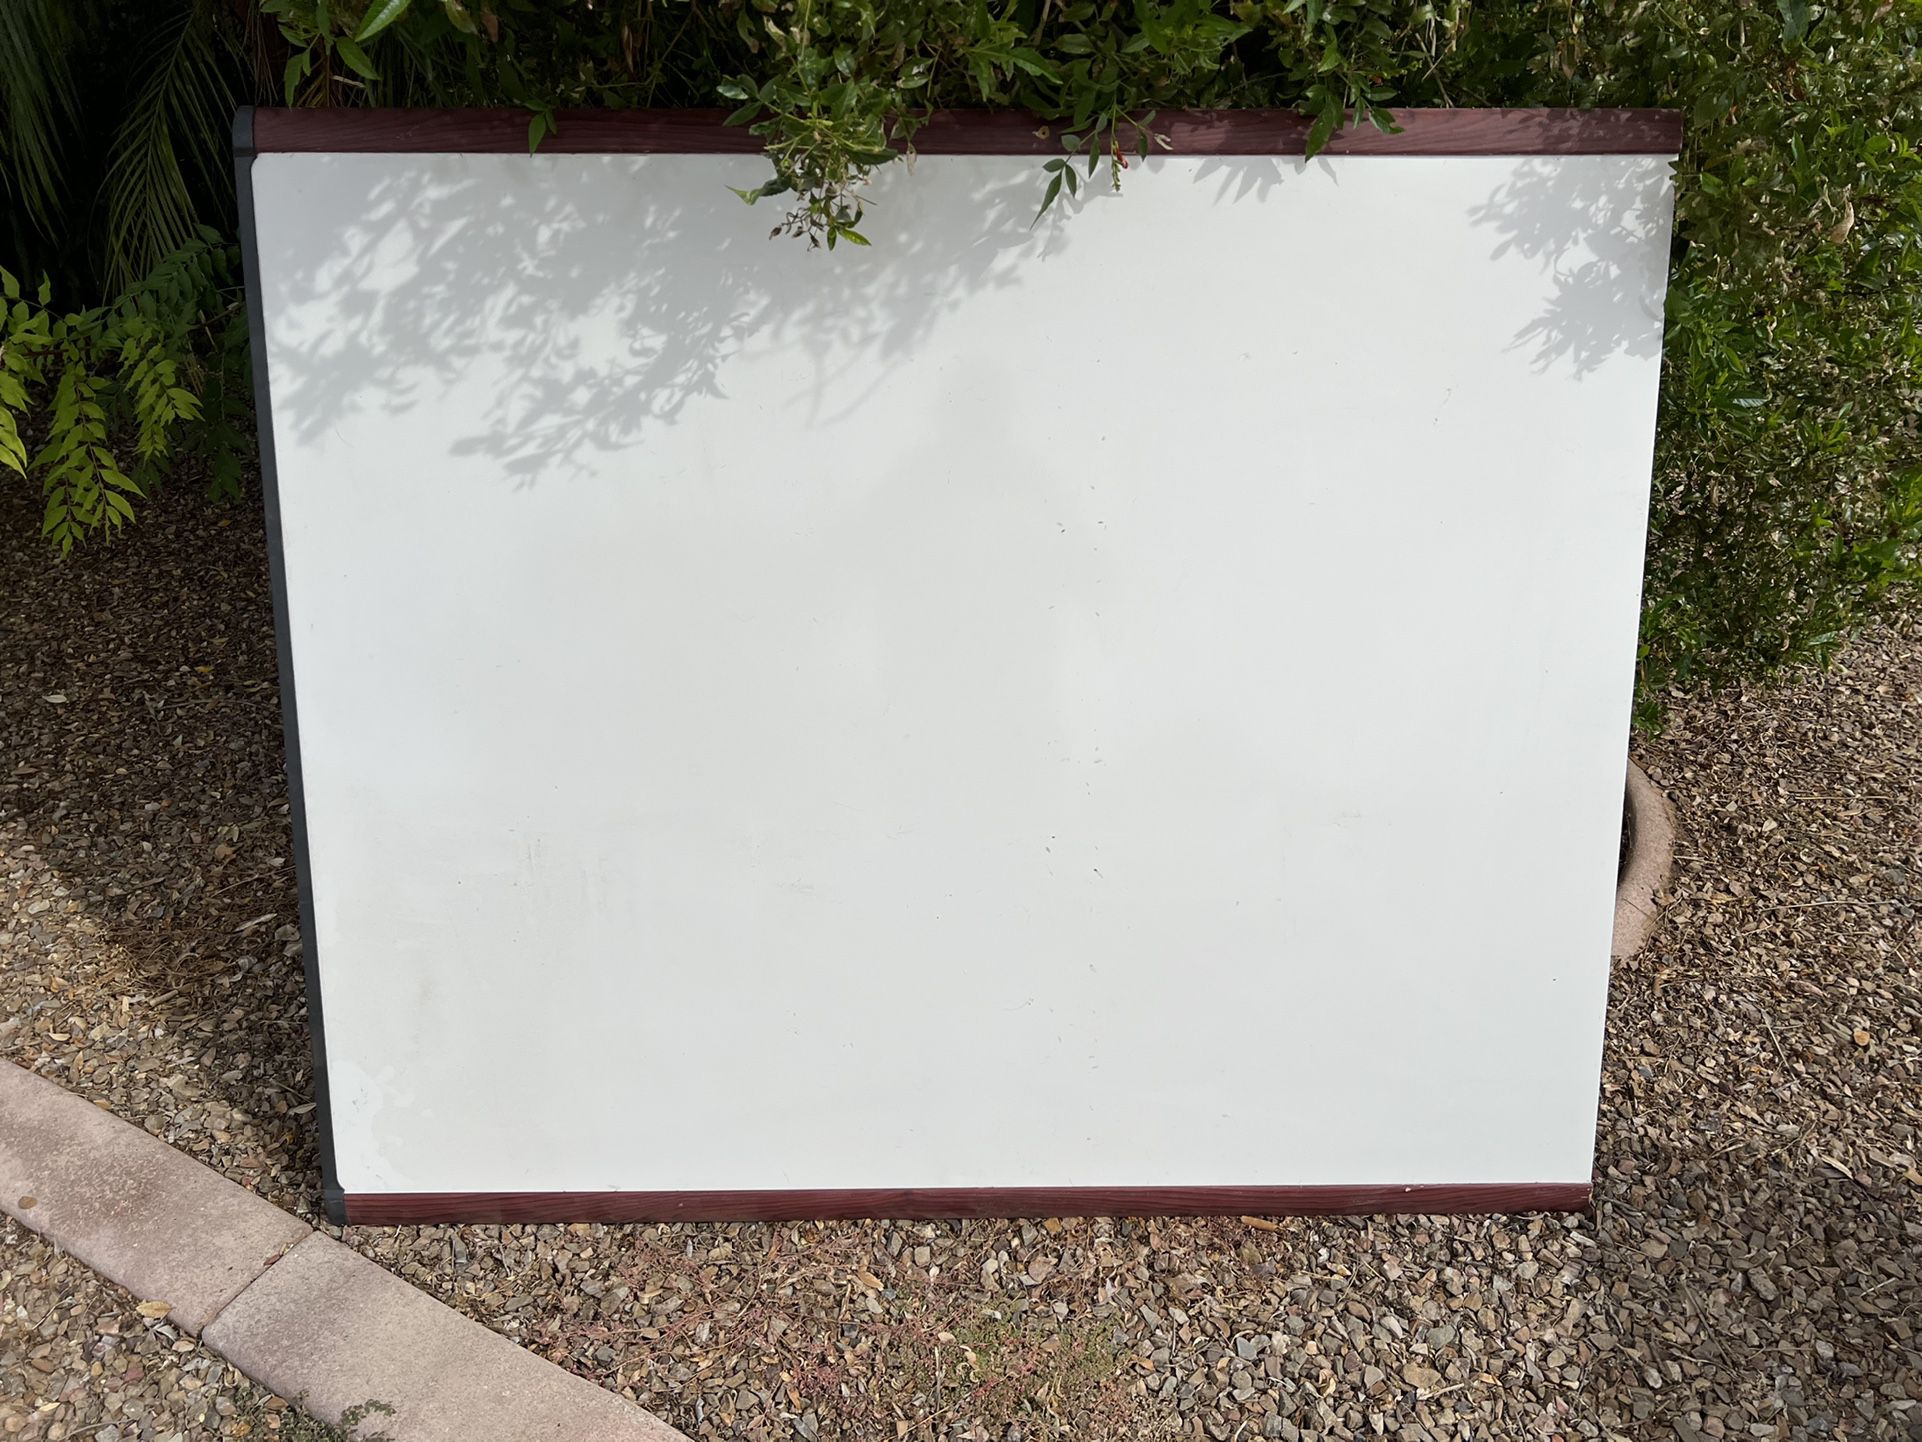 Dry Erase Magnetic White Writing Board-Great Condition! 5’x4’ Like New! $20.00 OBO